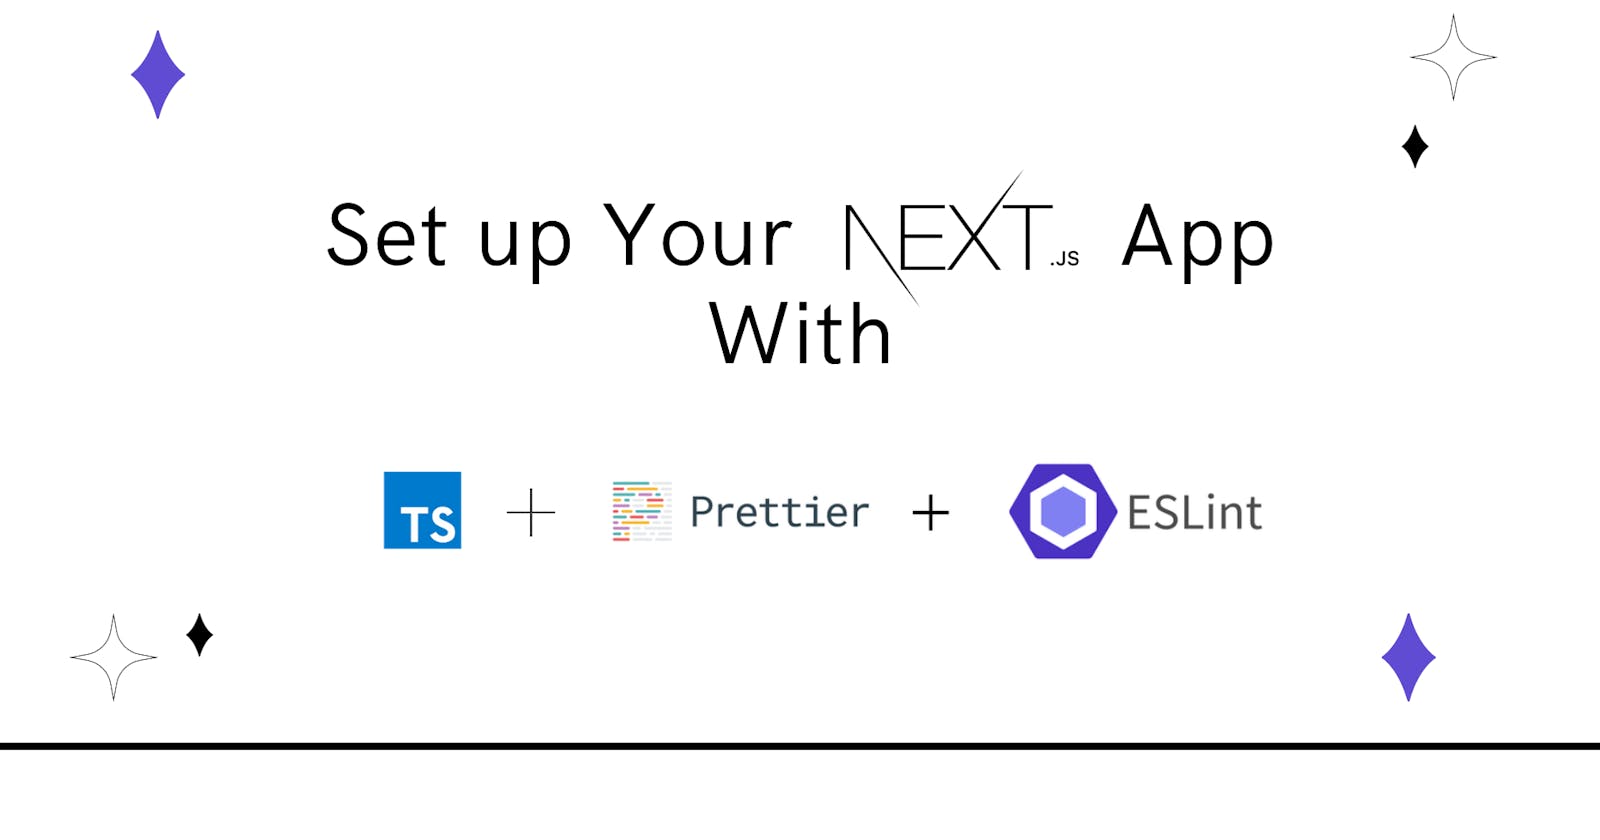 Set up Your Next Js App with Typescript, Eslint and Prettier